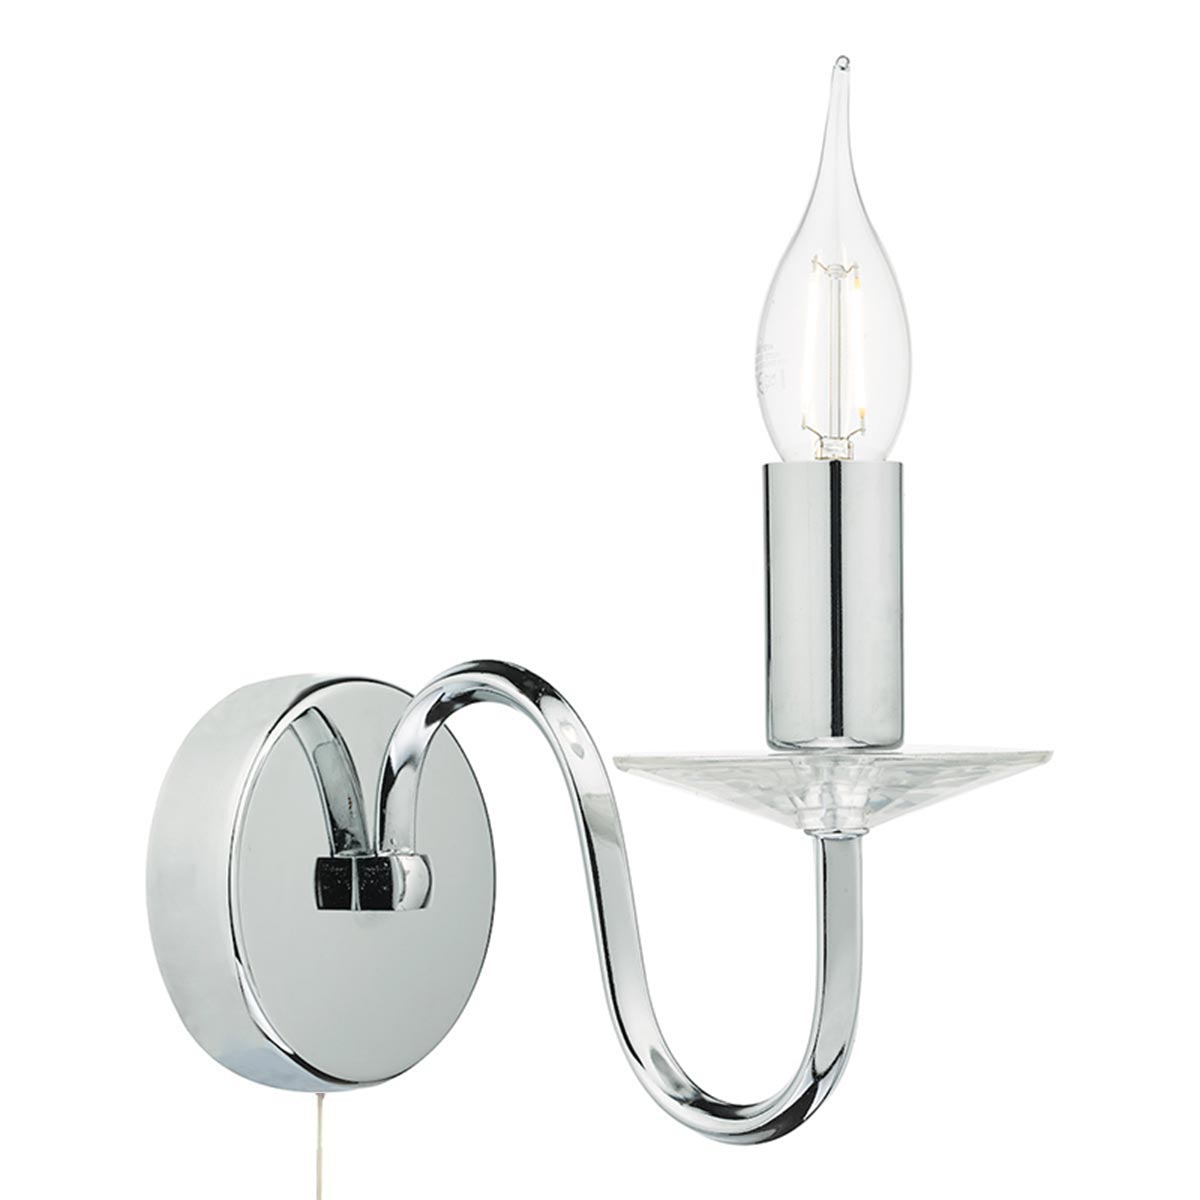 Dar Pique Switched Single Wall Light Polished Chrome Crystal Sconce